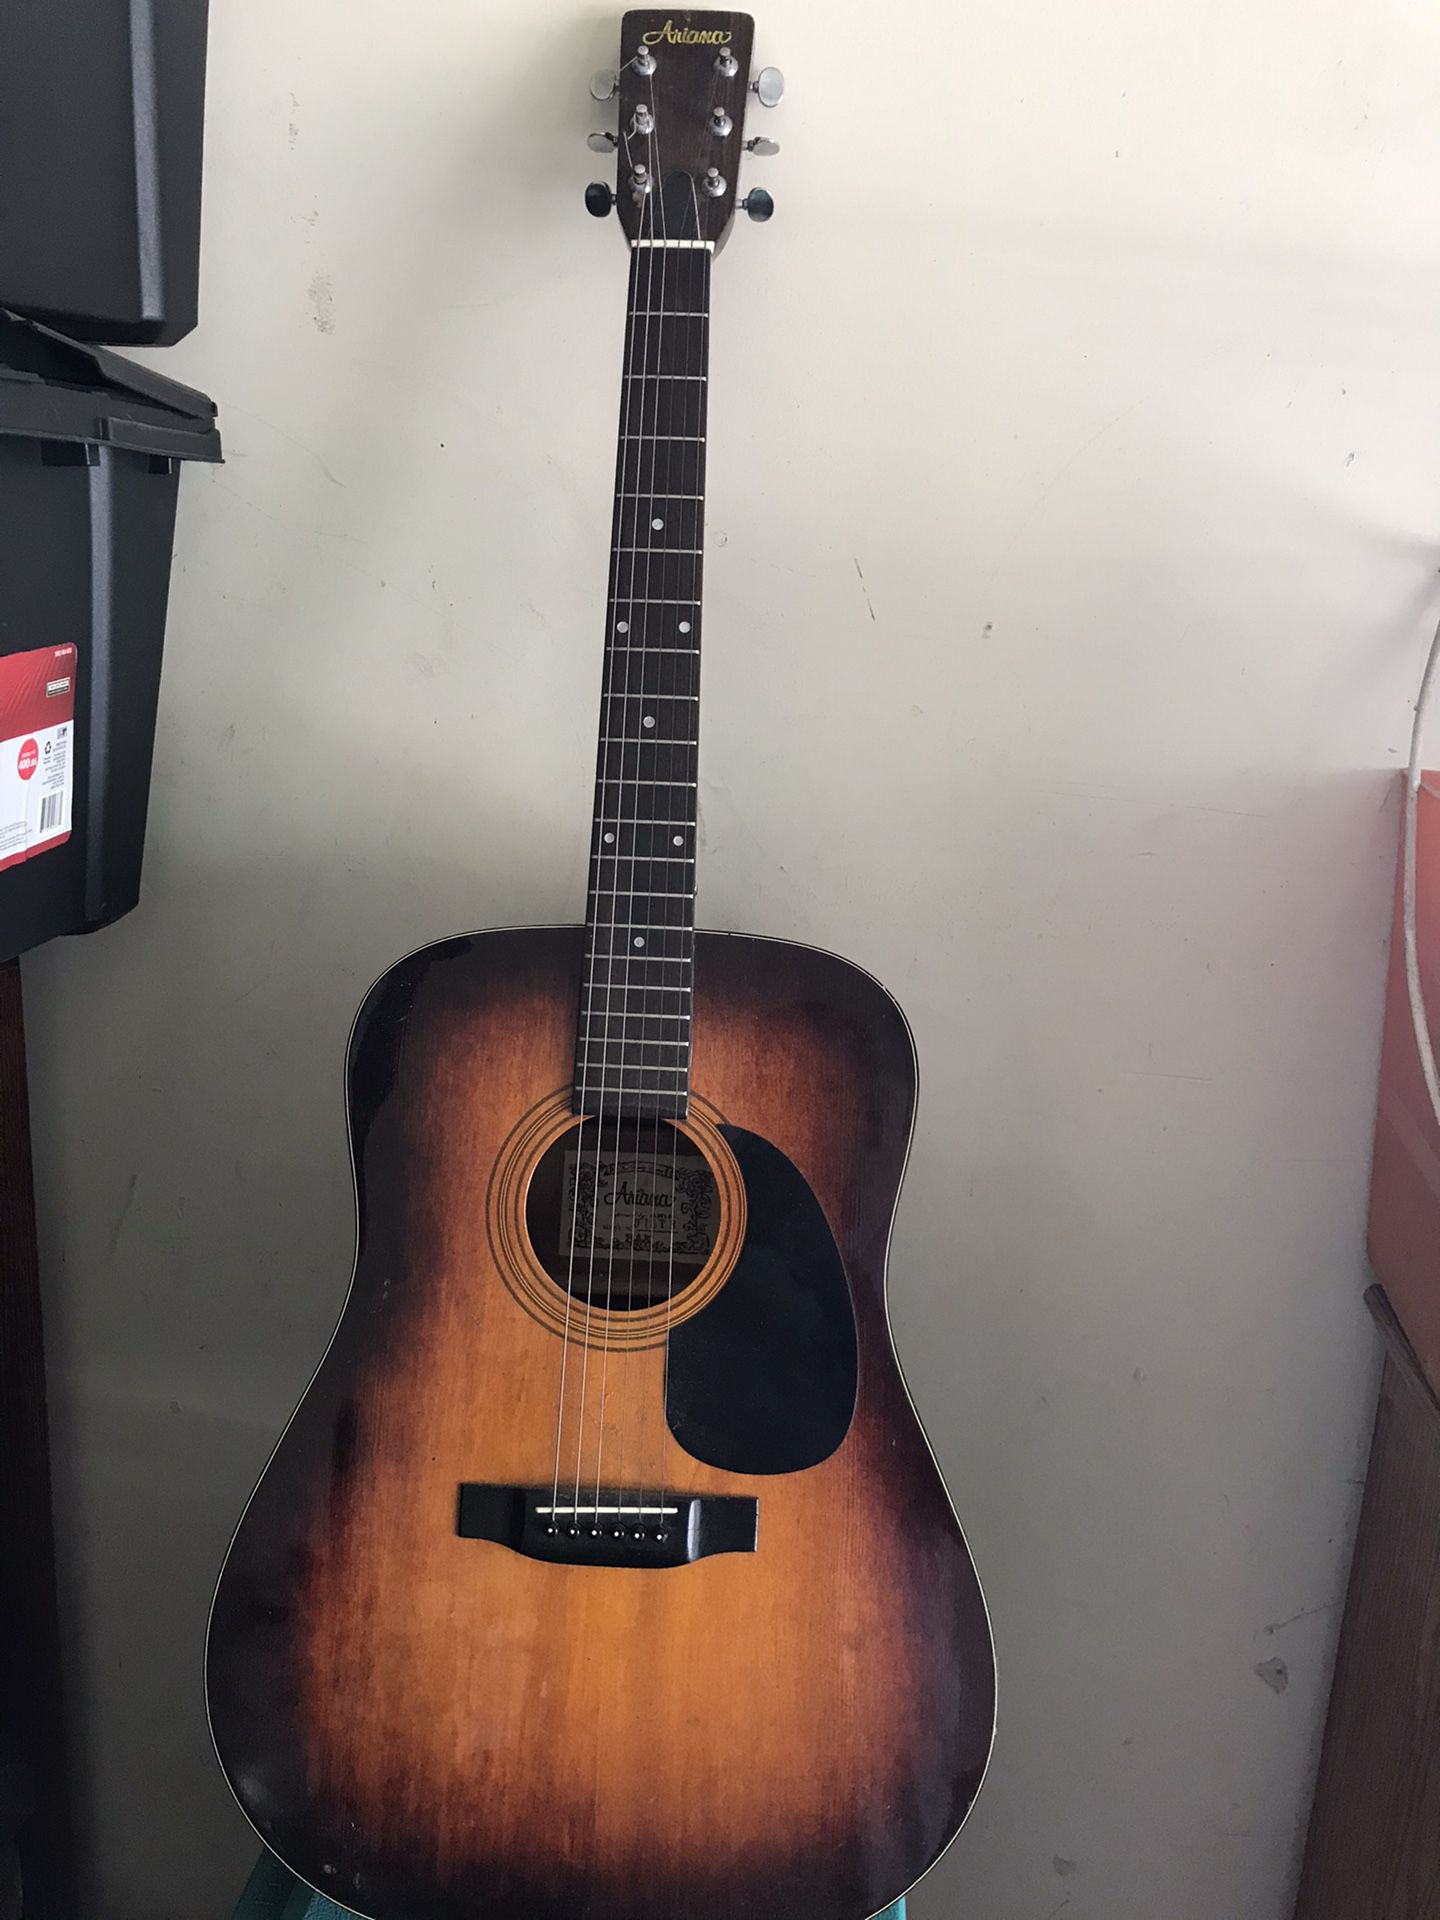 Old fashioned acoustic guitar